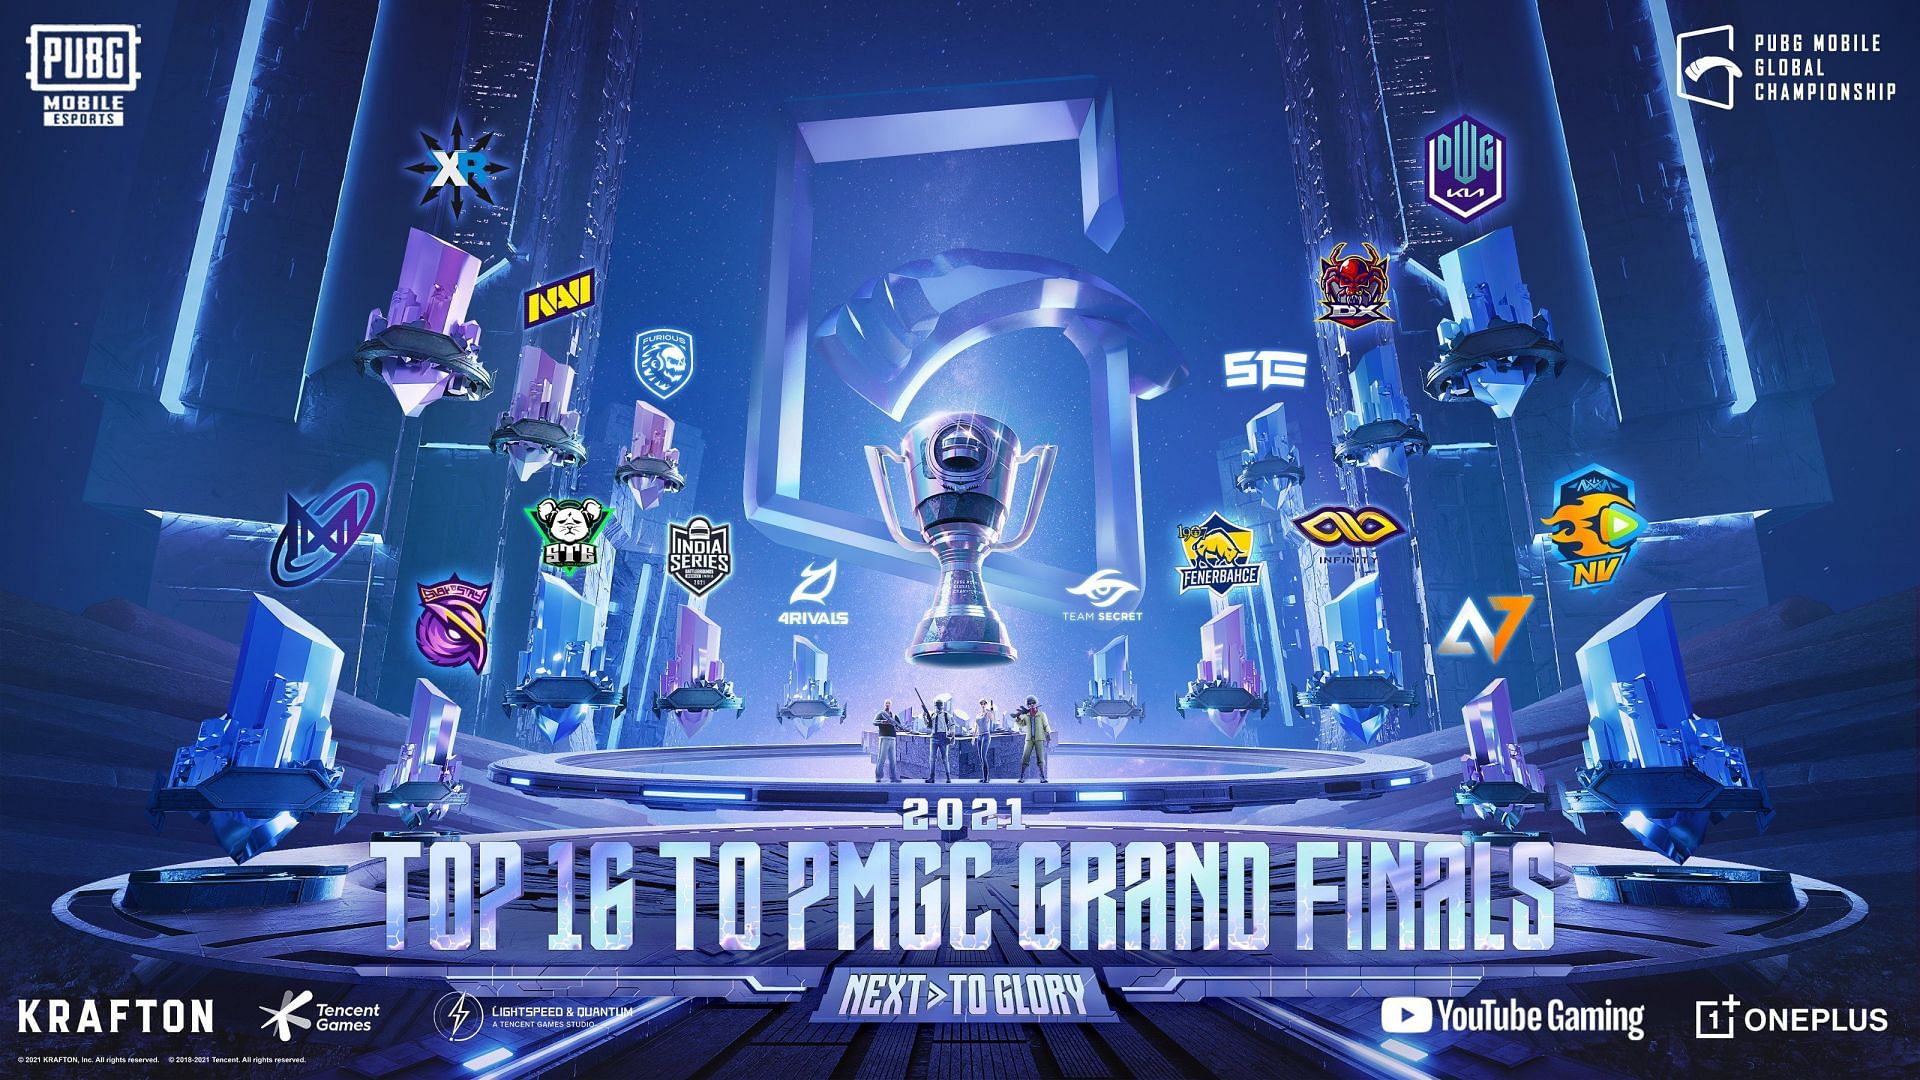 The Grand Finals of the PMGC 2021 will take place from 21 January 2022 (Image via PUBG Mobile)